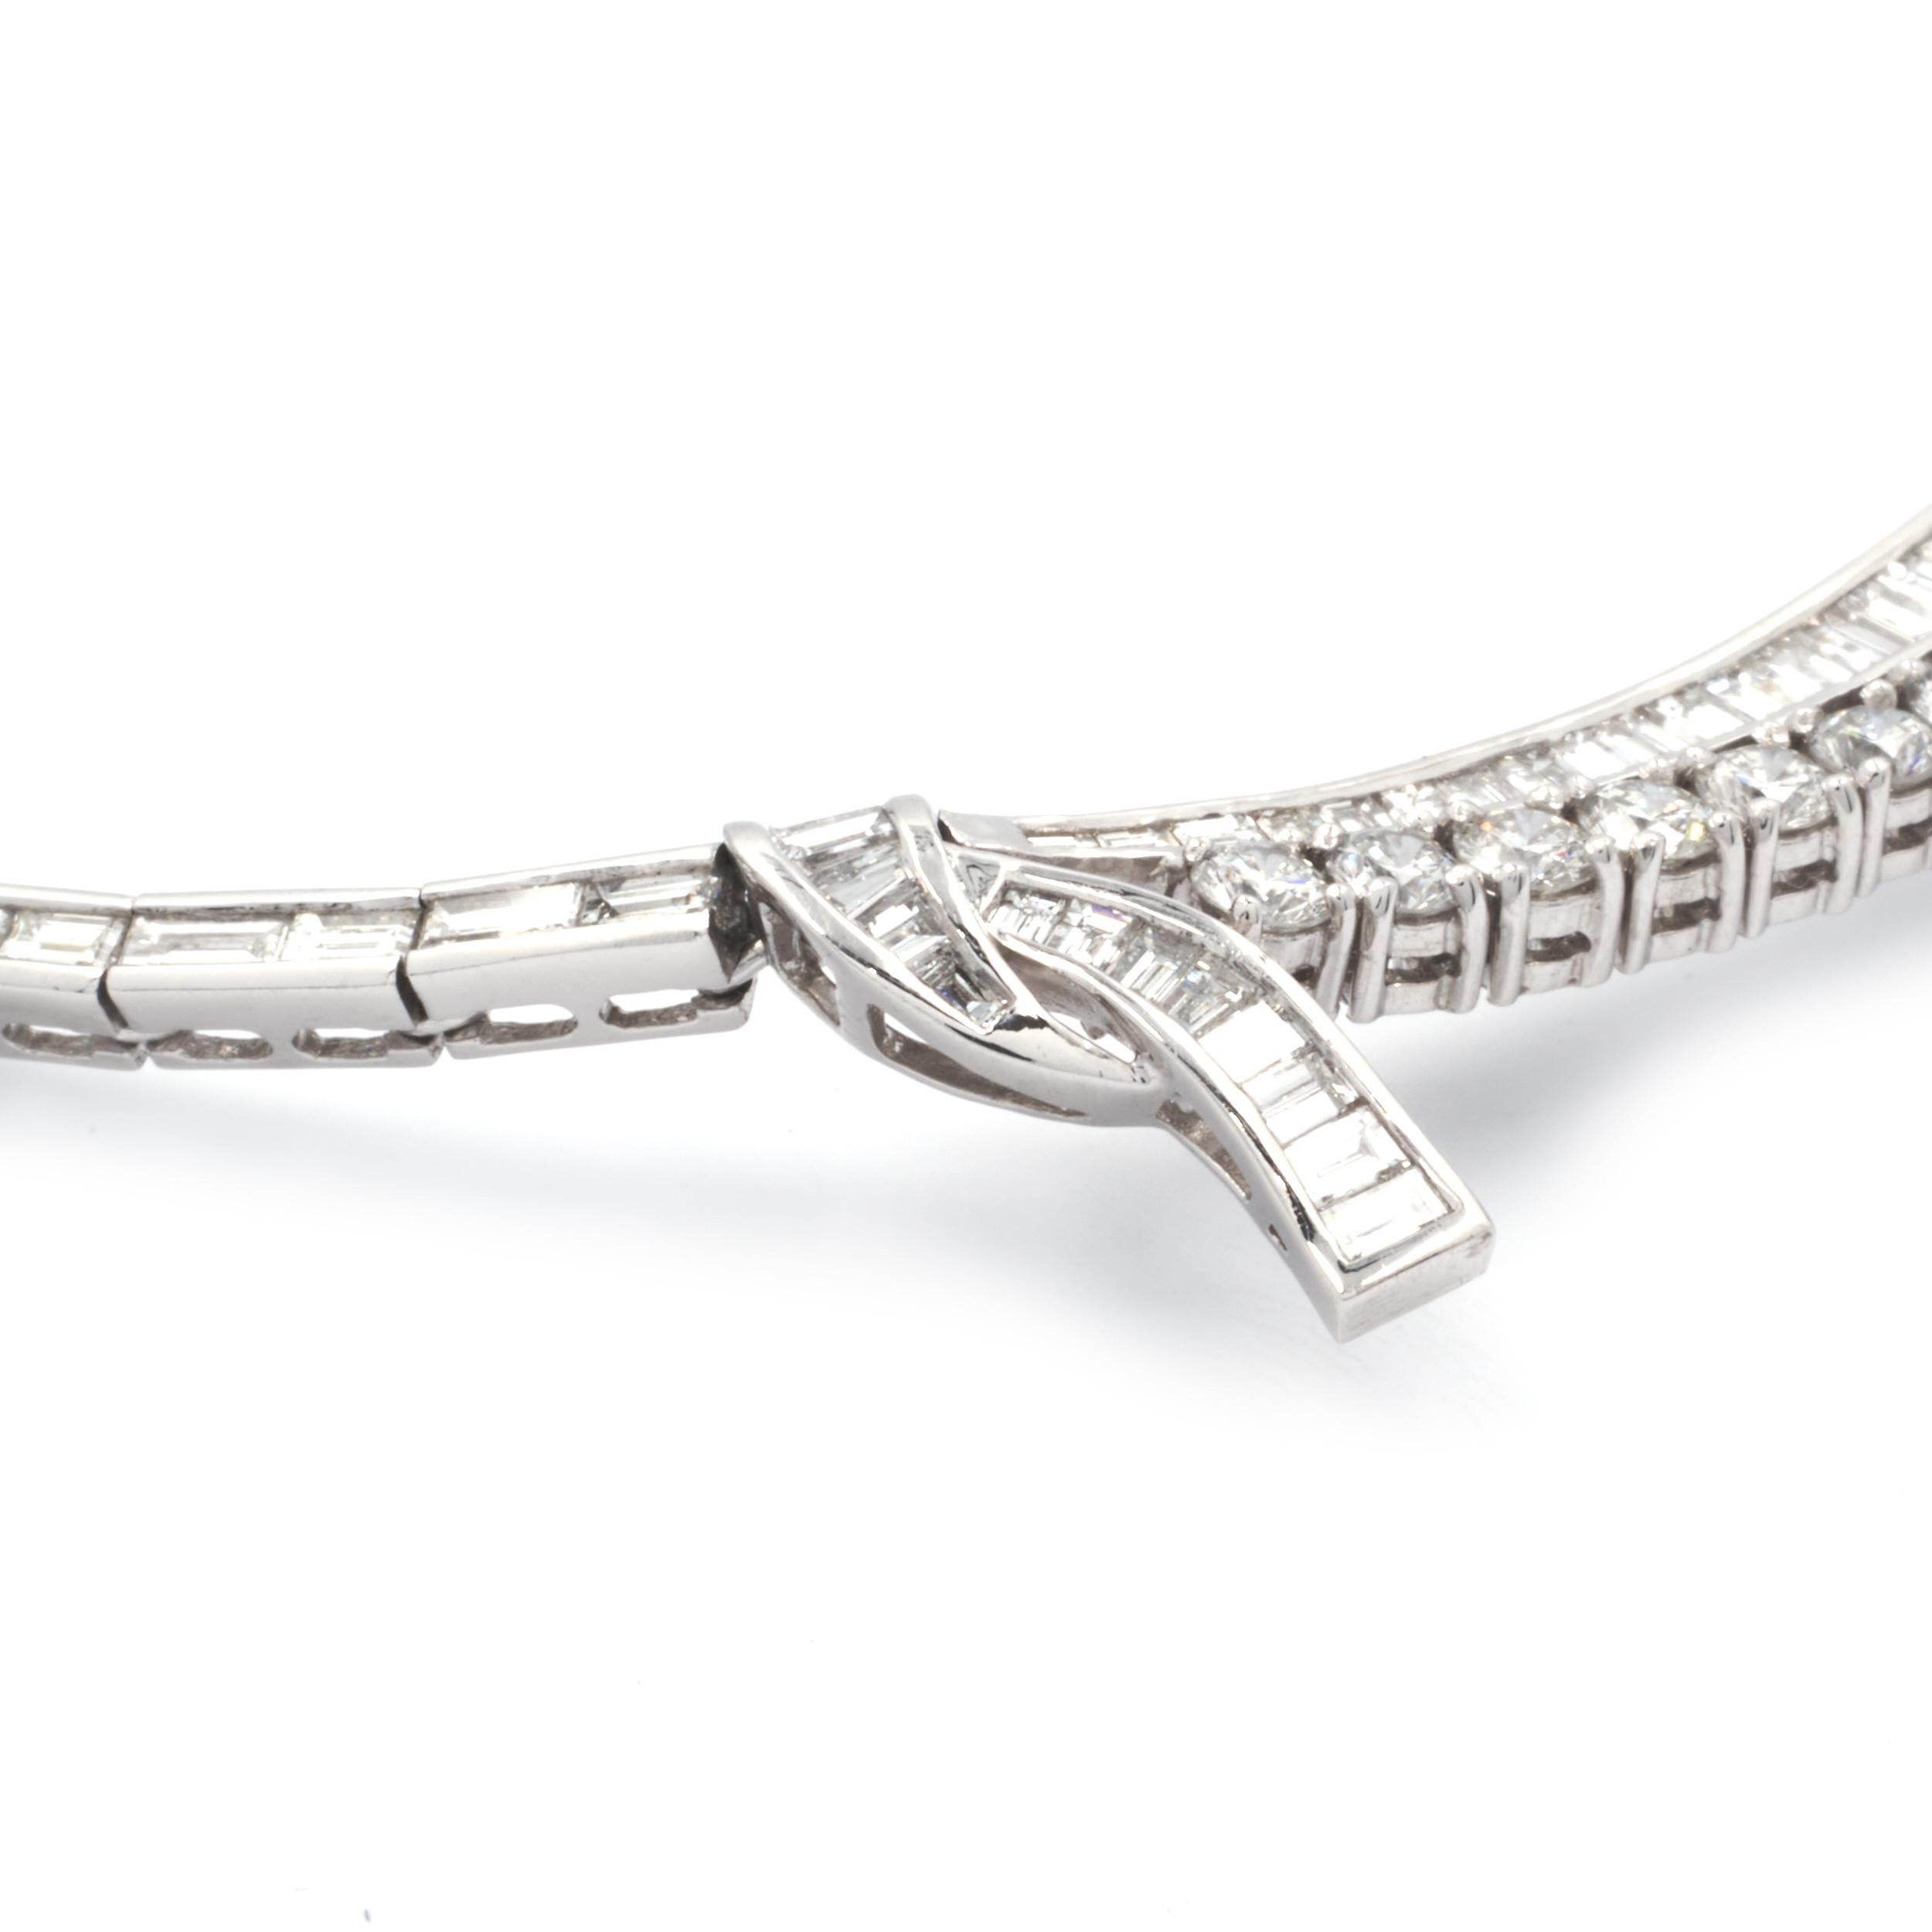 Designer: custom designed 
Material: Platinum
Diamonds: 17 marquise, 19 round brilliant, 69 baguette cut, and 1 pear cut = 19.89cttw
Color: G
Clarity: VS1-2
Dimensions: necklace measures 16-inches long 
Weight:  57.69 grams	
